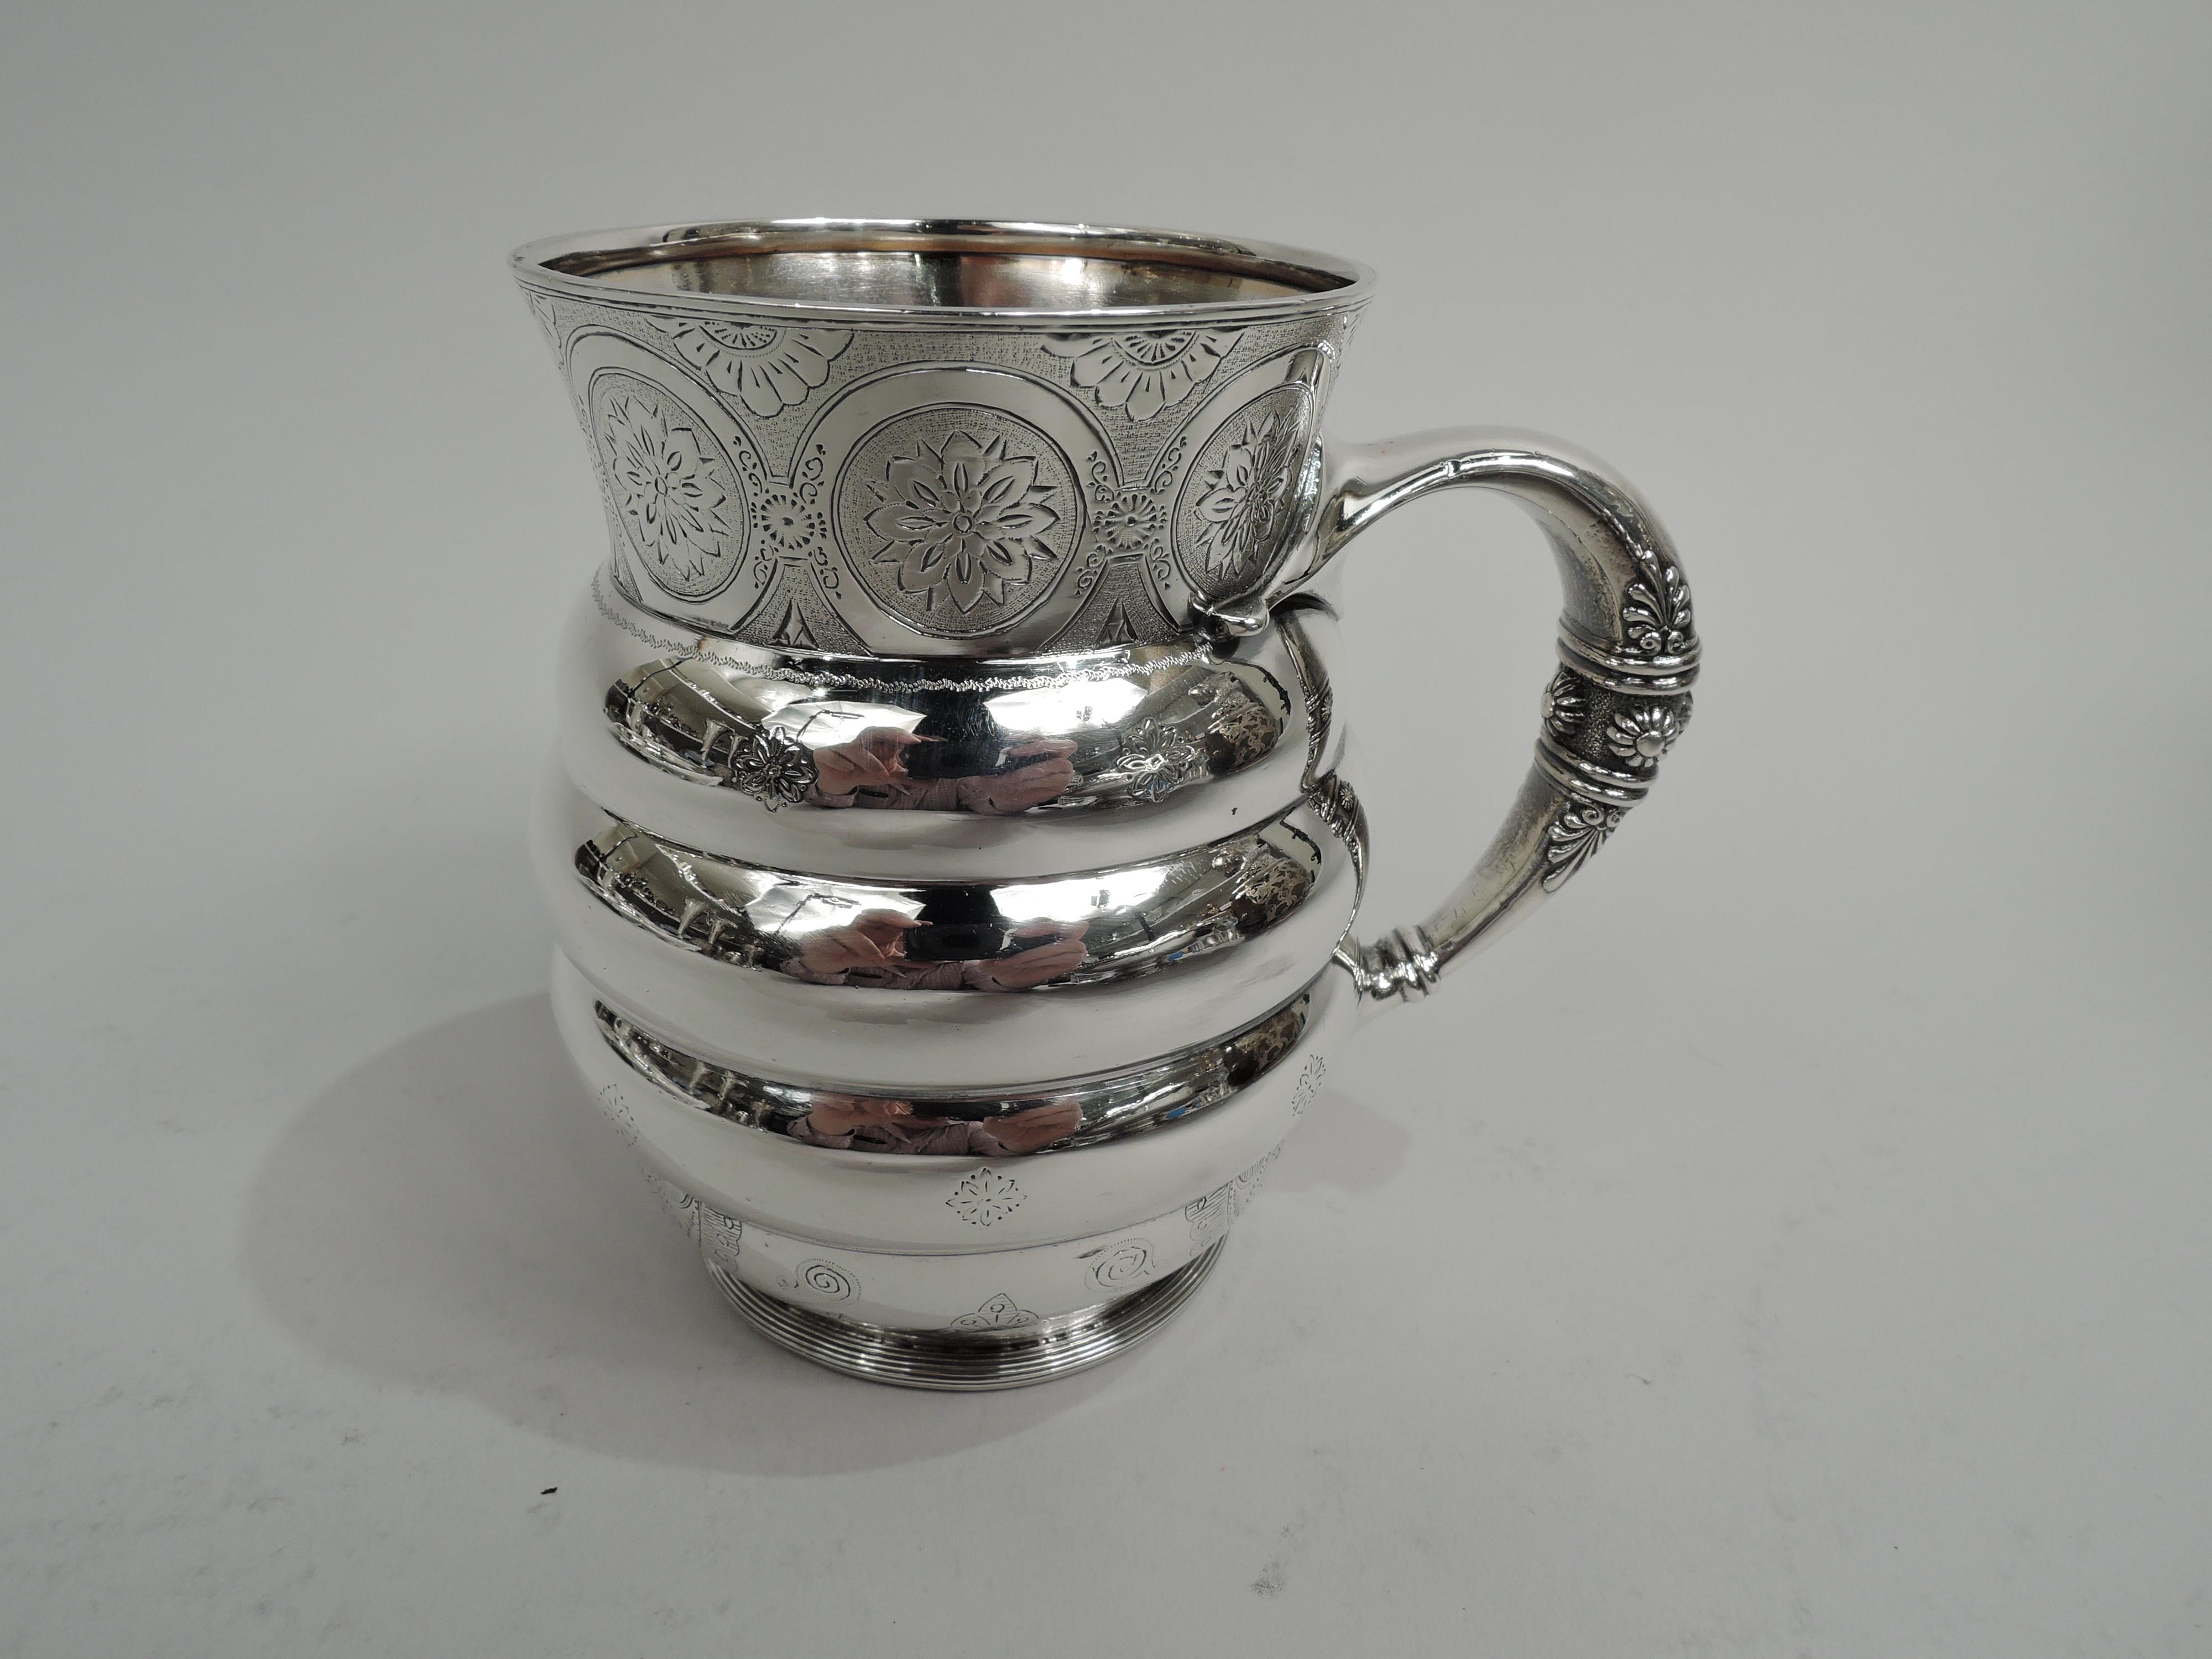 Aesthetic Movement Rare and Unusual Tiffany Aesthetic Sterling Silver Beehive Baby Cup